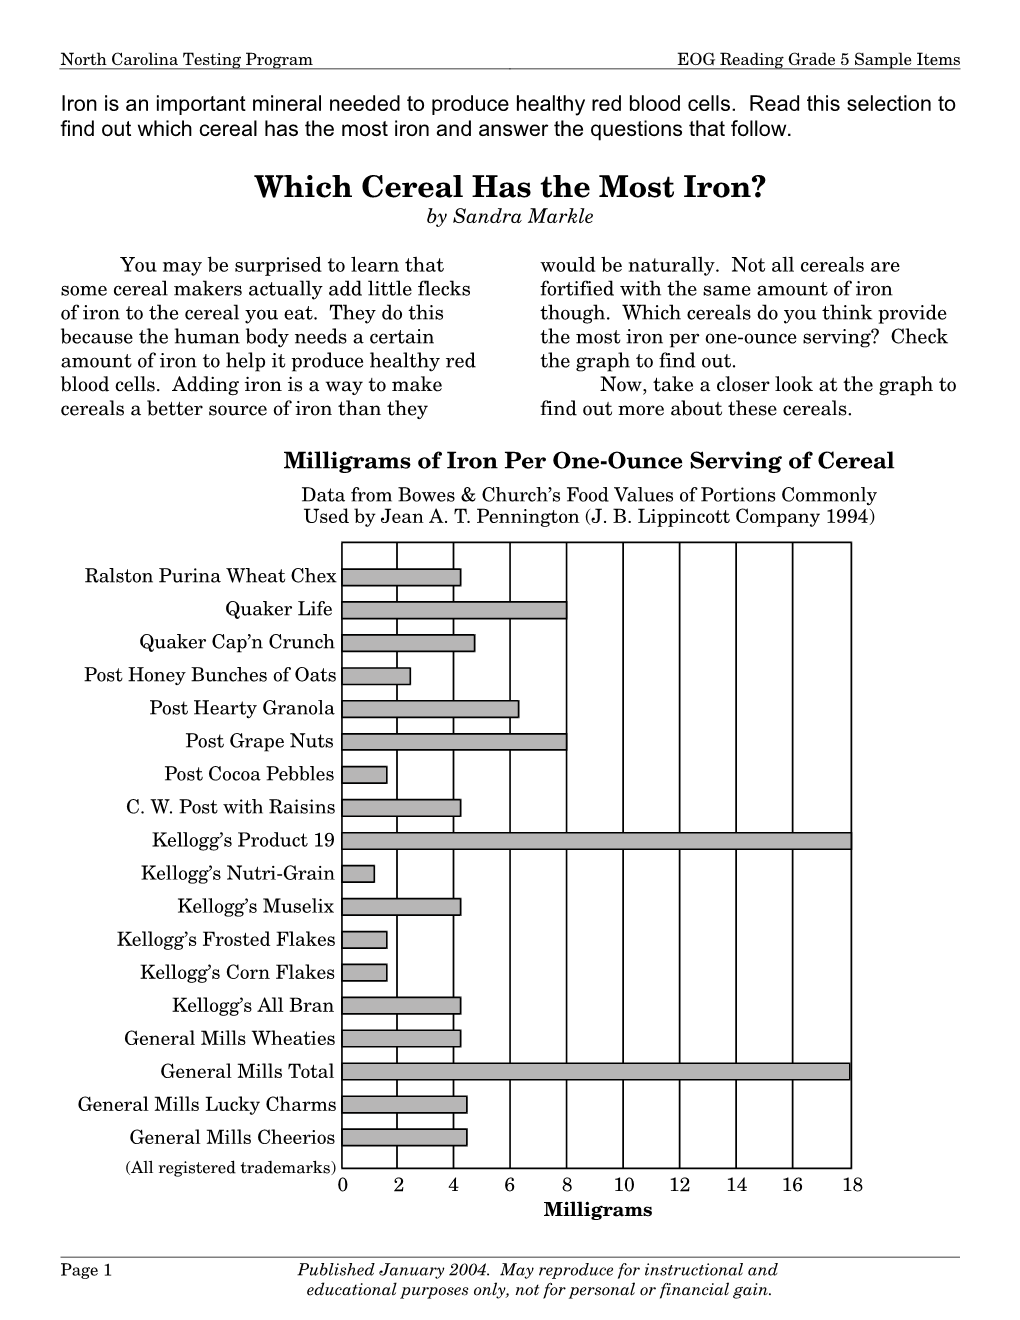 Which Cereal Has the Most Iron? by Sandra Markle